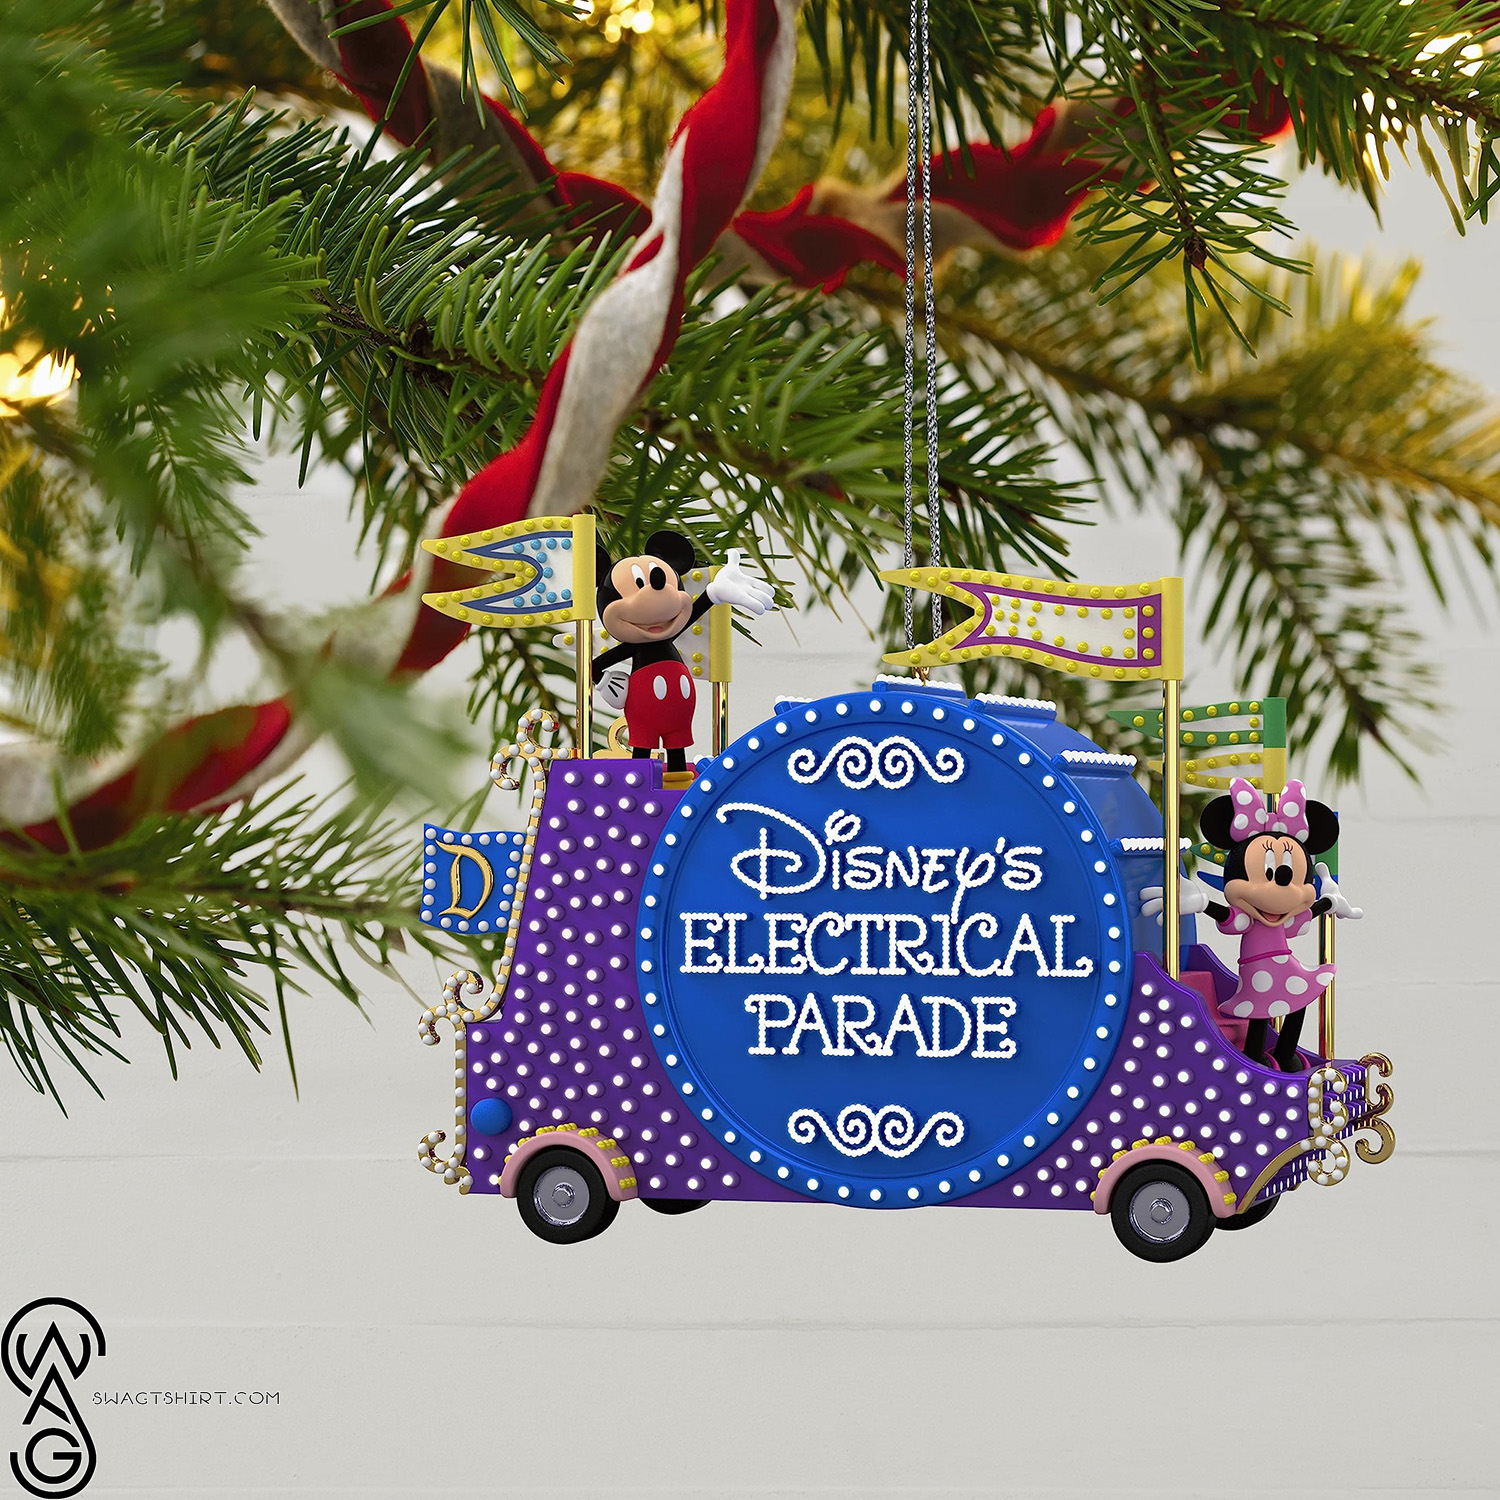 Enchant Your Christmas with Disney's Electrical Parade Ornament Collection